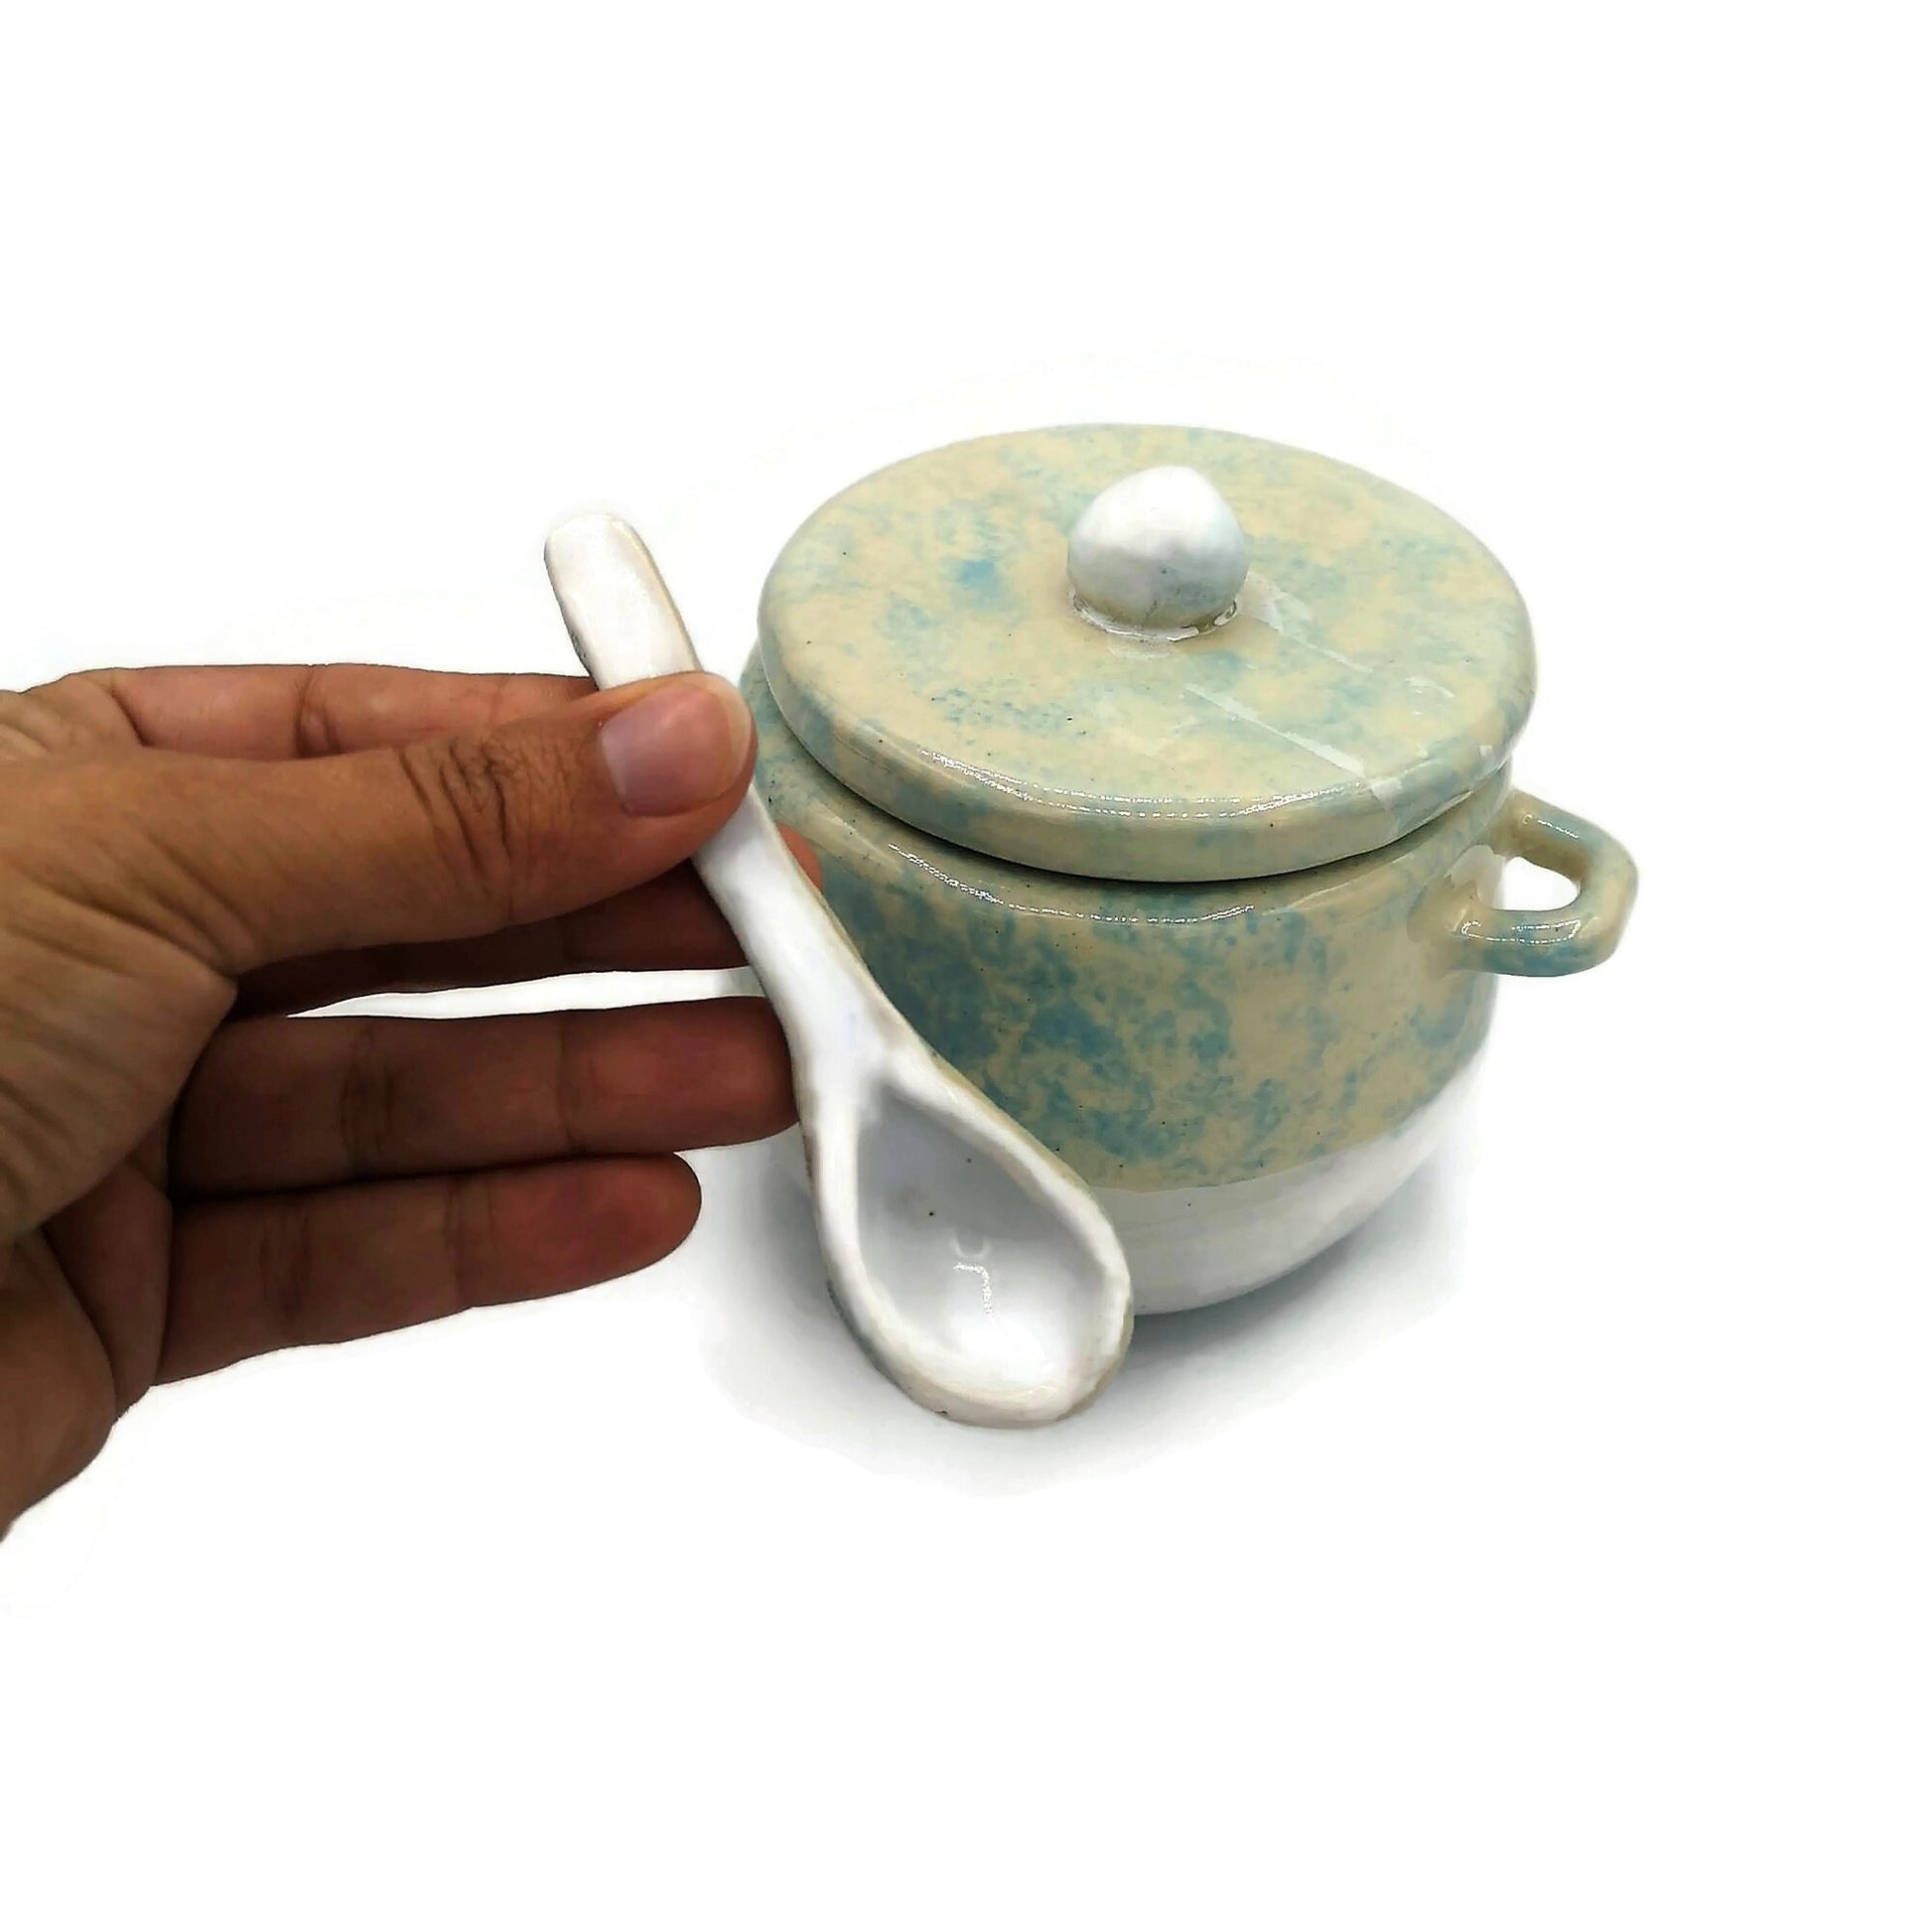 STONEWARE SUGAR BOWL With Lid And Spoon, Modern Ceramic Salt Bowl, Housewarming Gift First Home, Mothers Day Gift From Daughter, Sugar Jar - Ceramica Ana Rafael